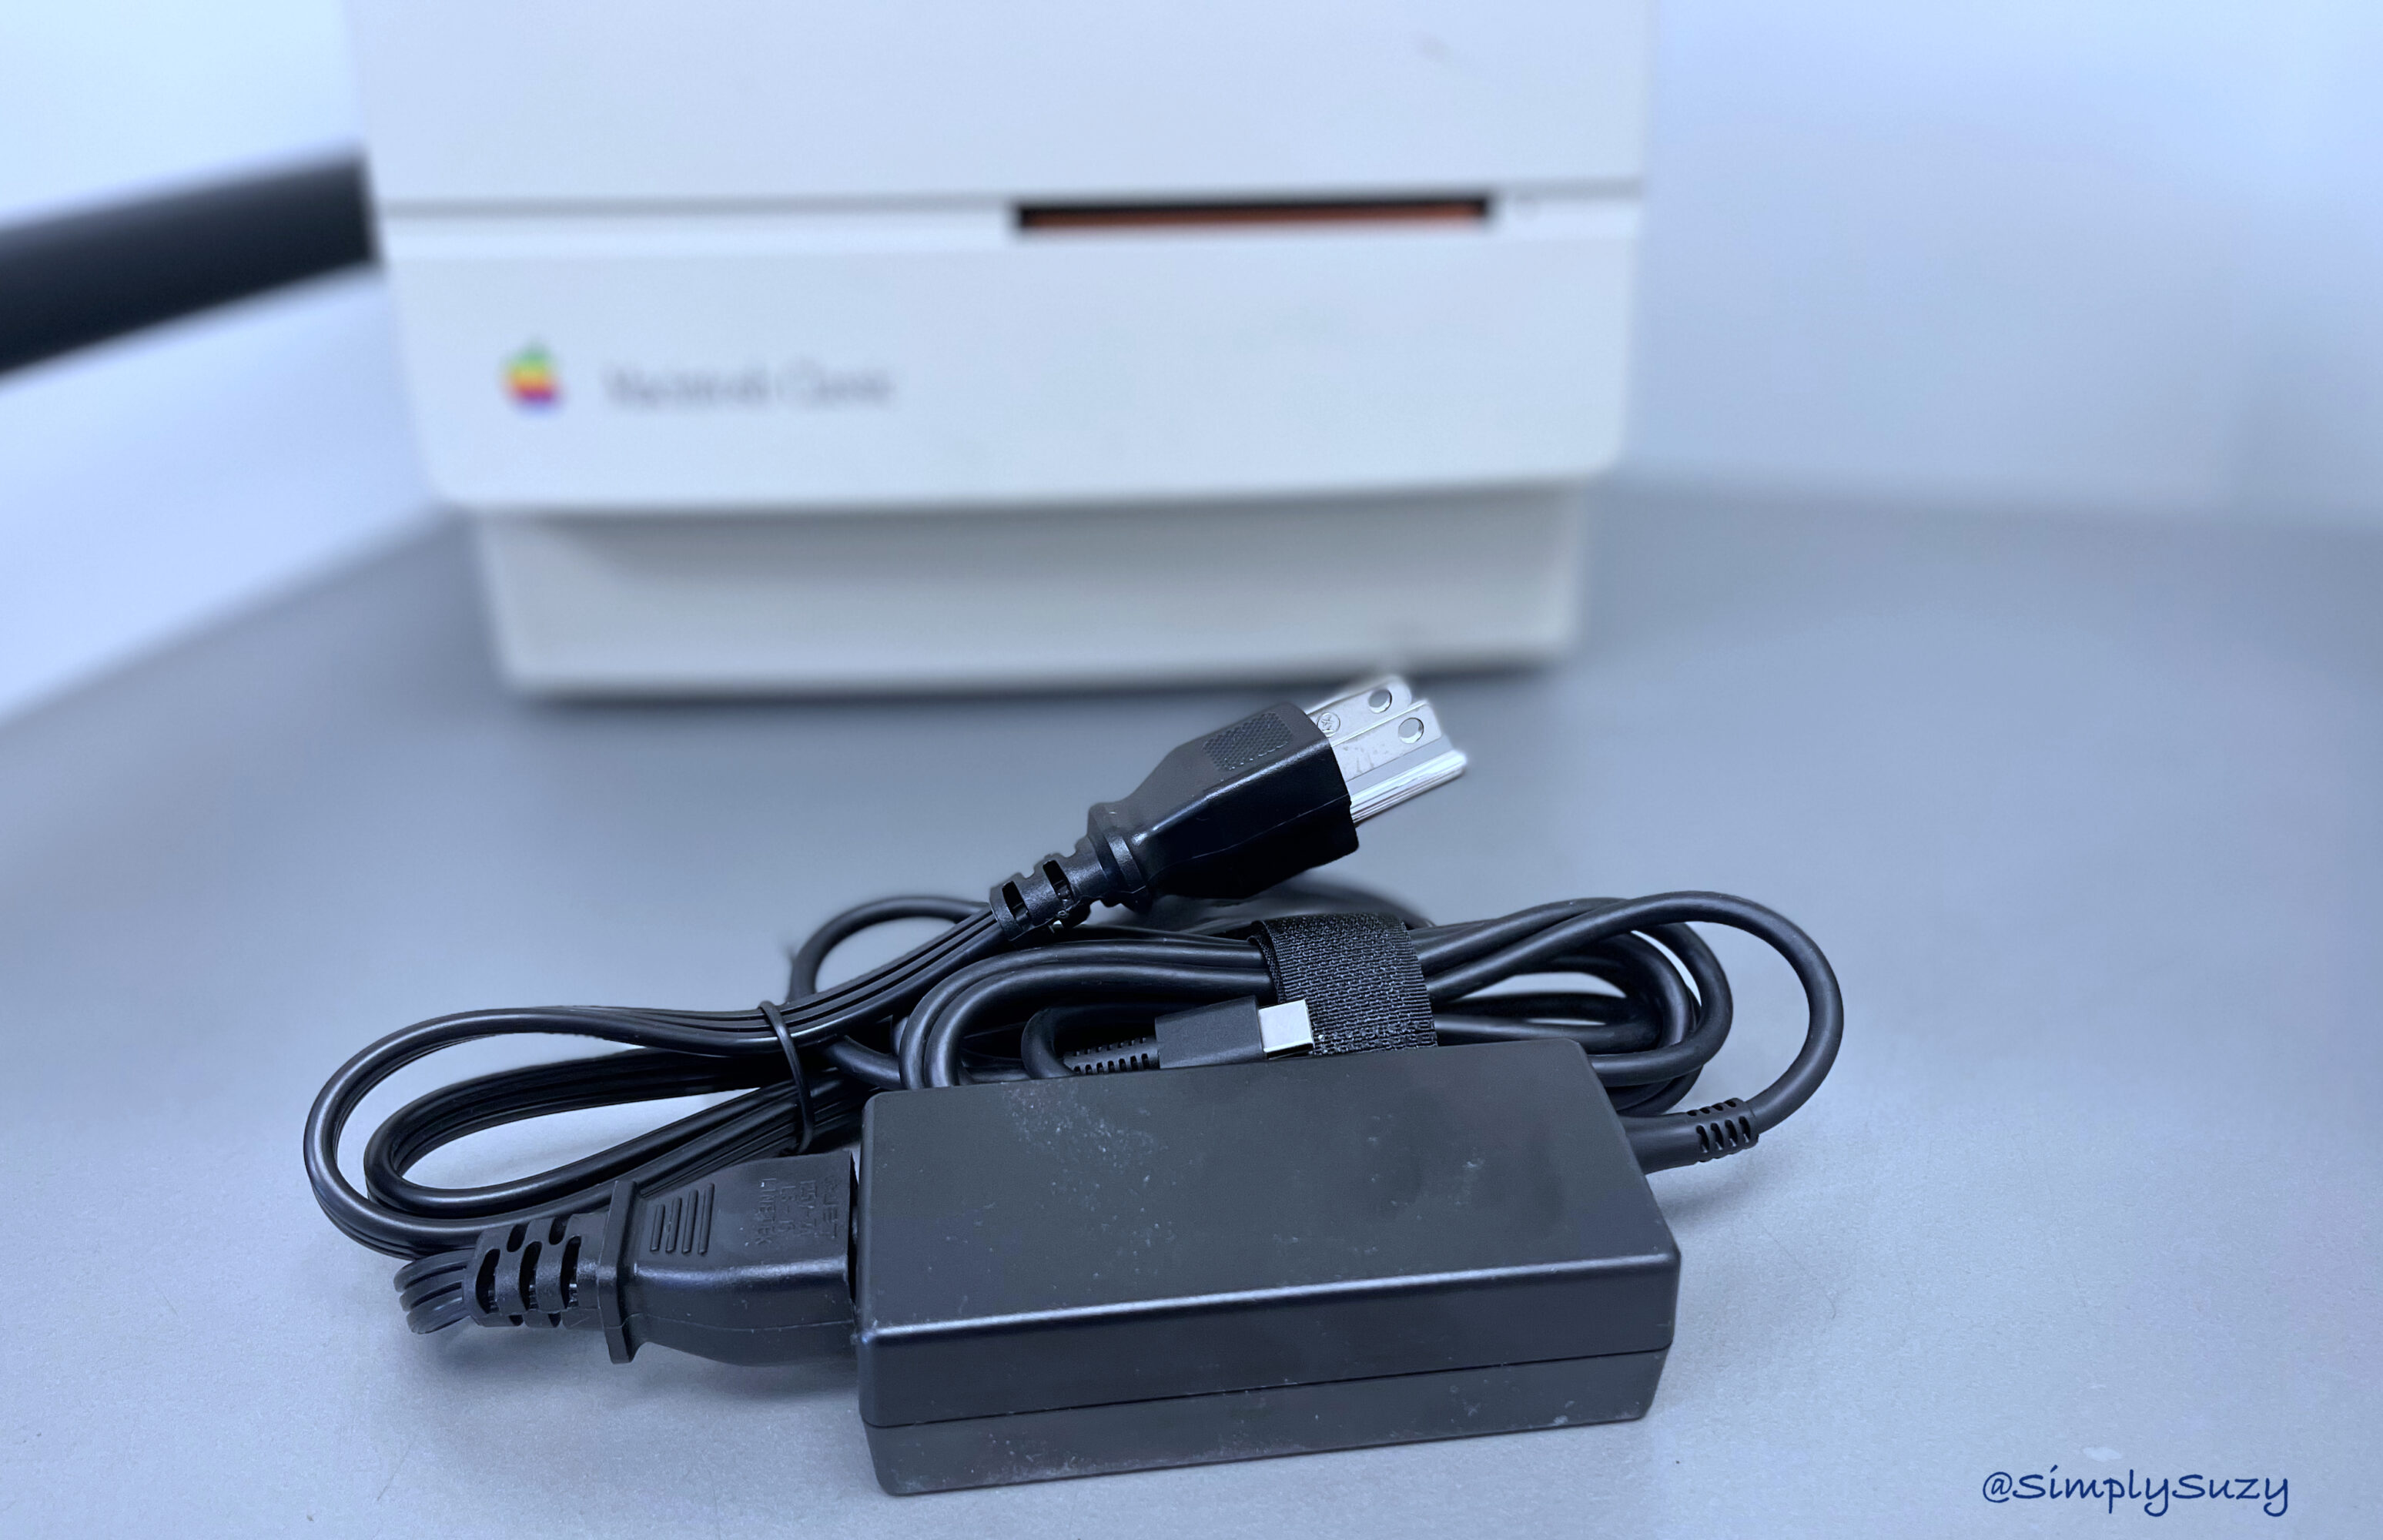 A Macintosh Classic in the background with a powercord wrapped up in the foreground.